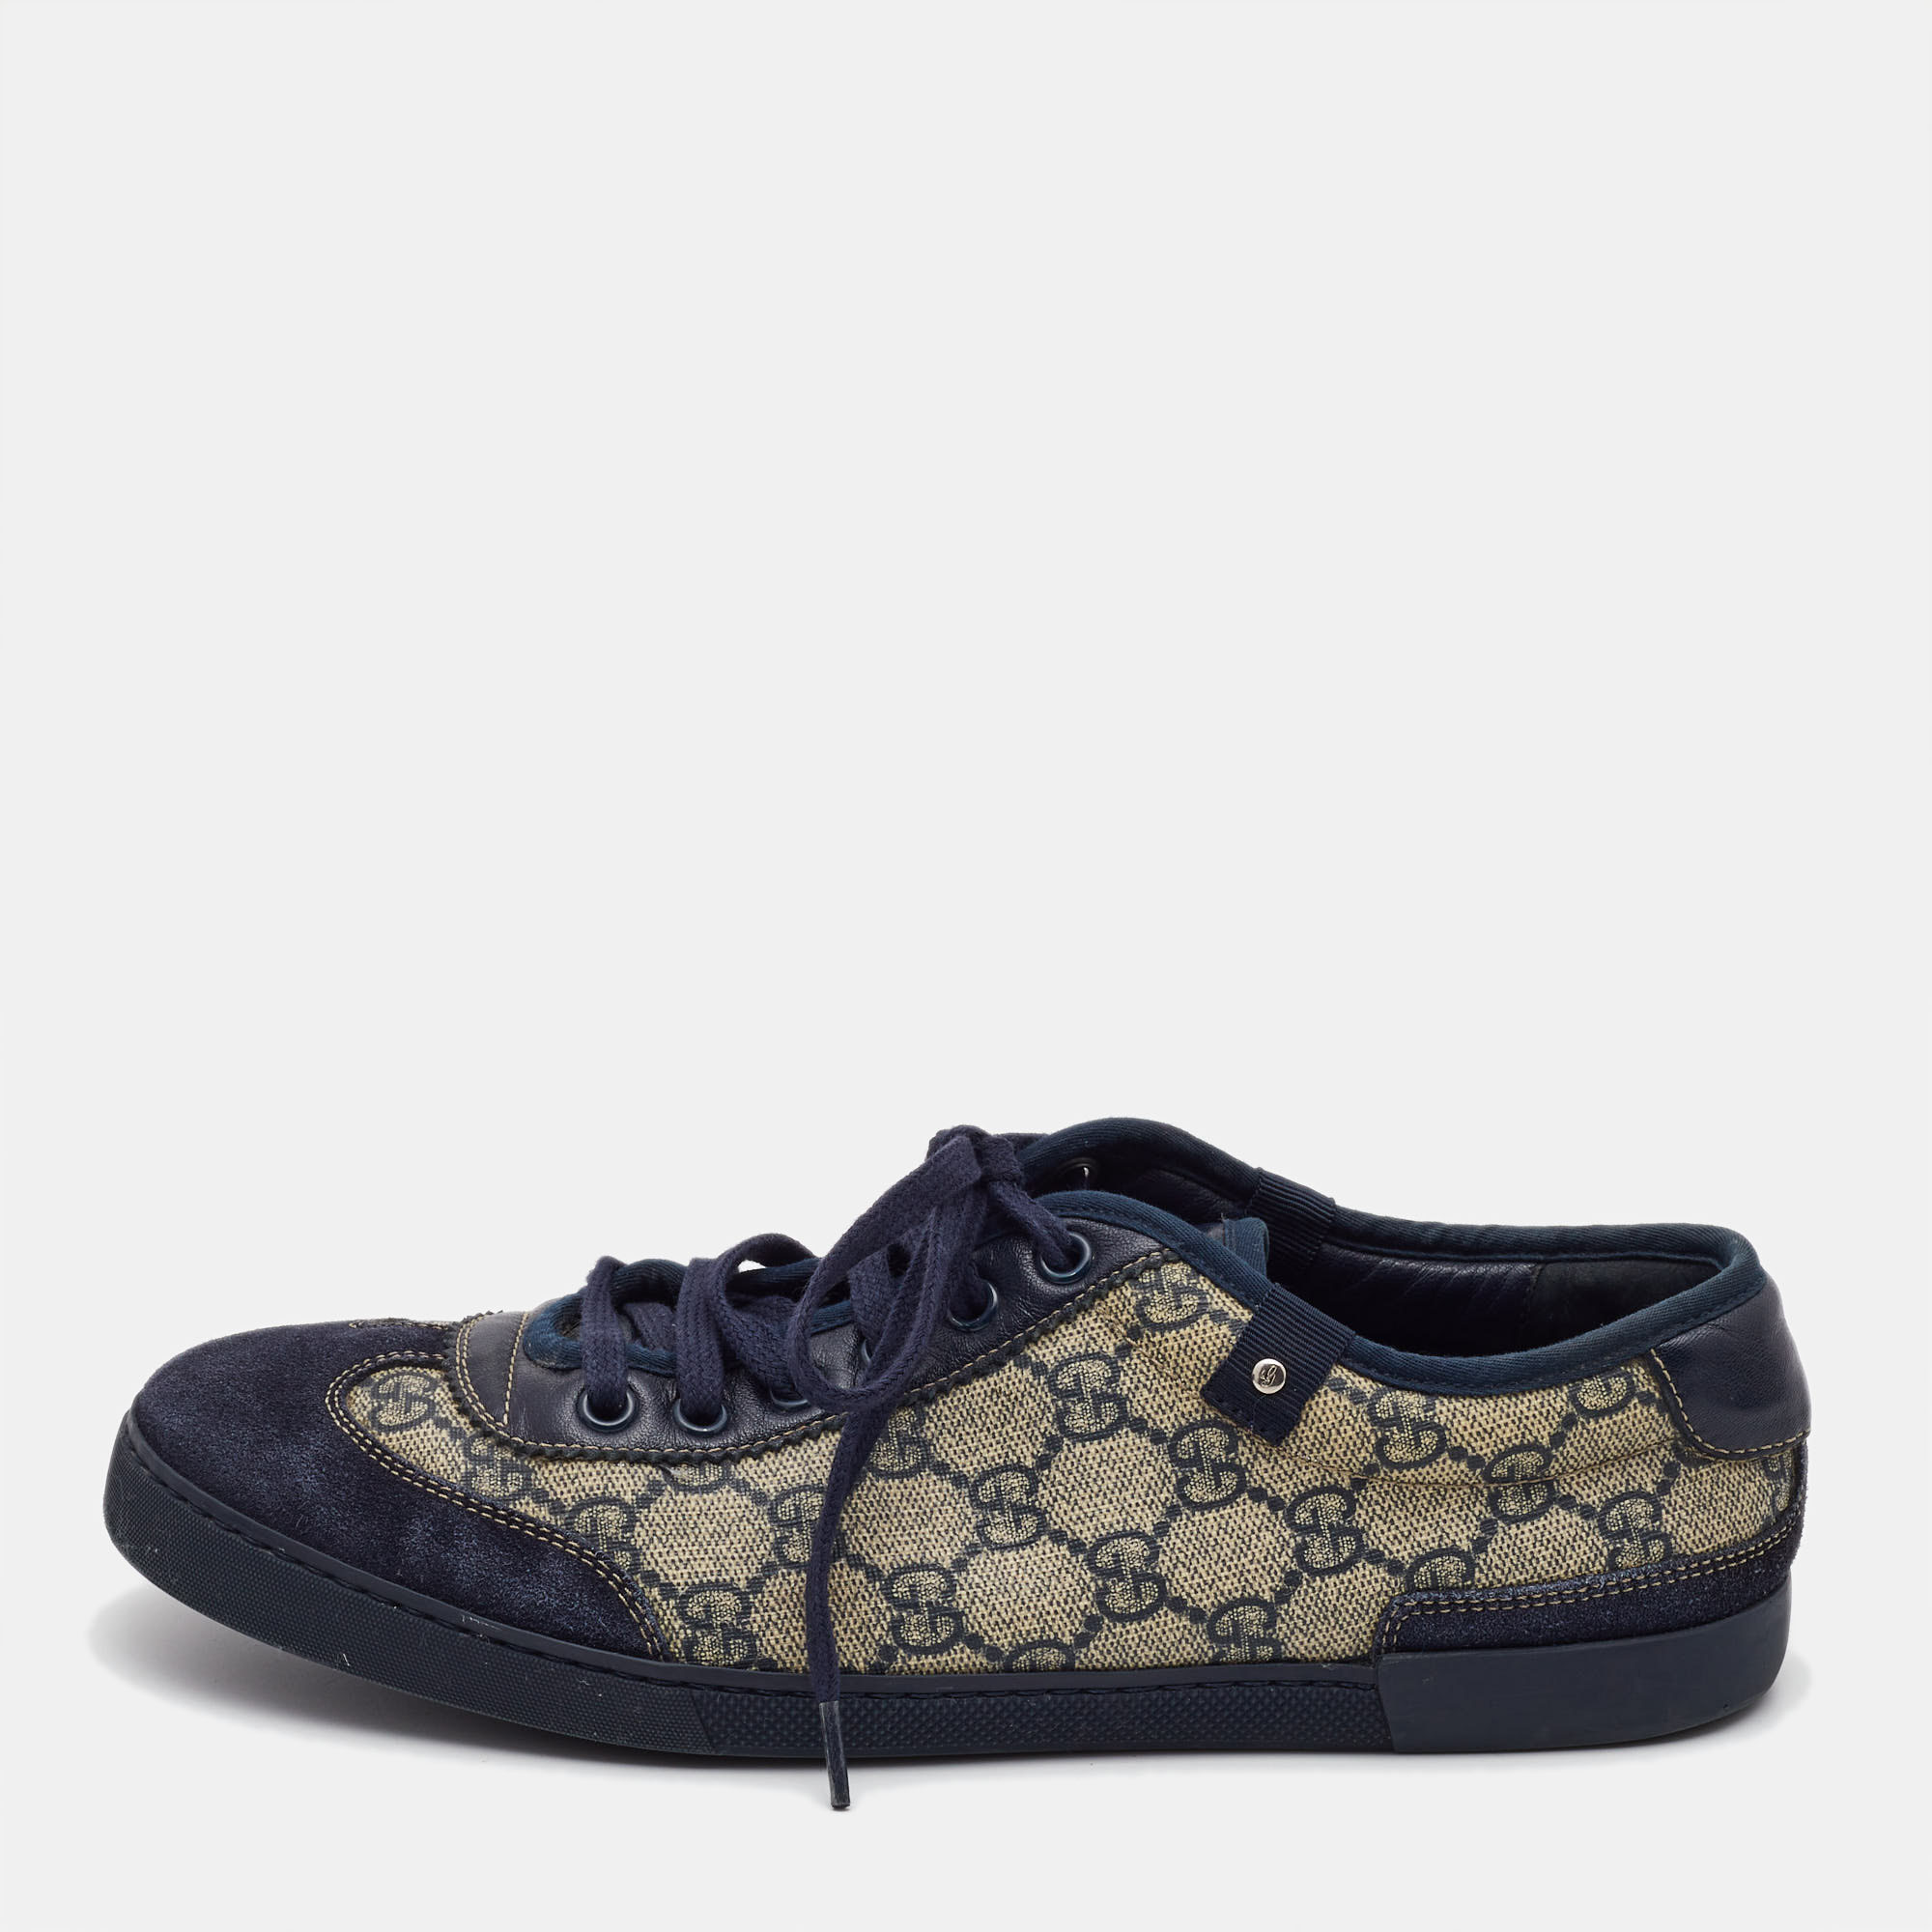 Gucci navy blue/grey gg canvas and suede low top sneakers  size 40.5